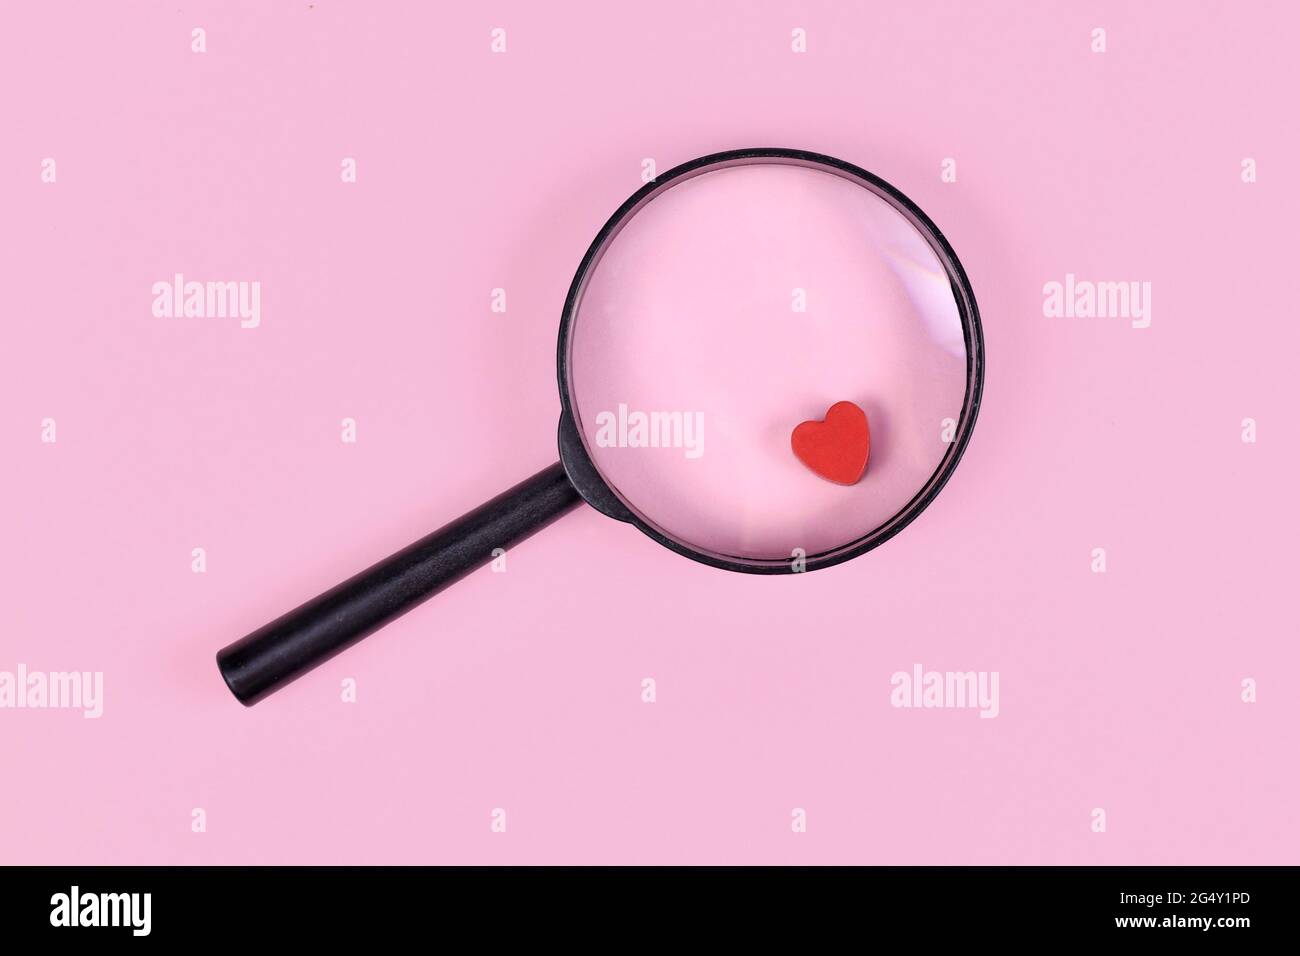 Concept for finding love with magnifier glass and red heart icon on pink background Stock Photo